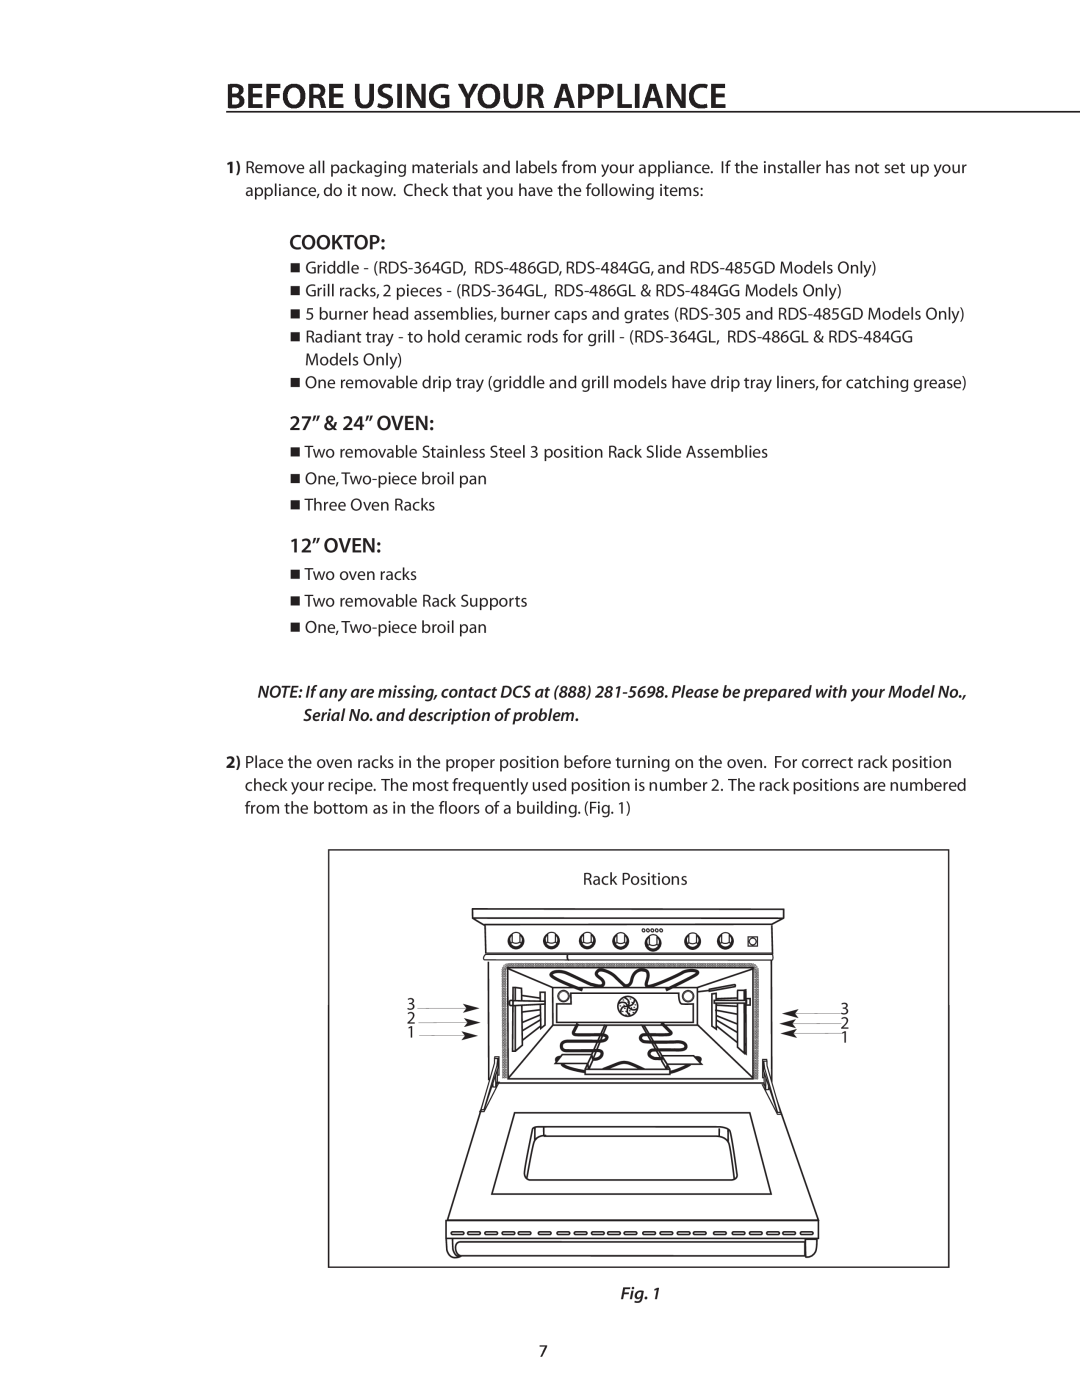 DCS RDS-305 manual Before Using Your Appliance, Cooktop, 27” & 24” OVEN, 12” OVEN 